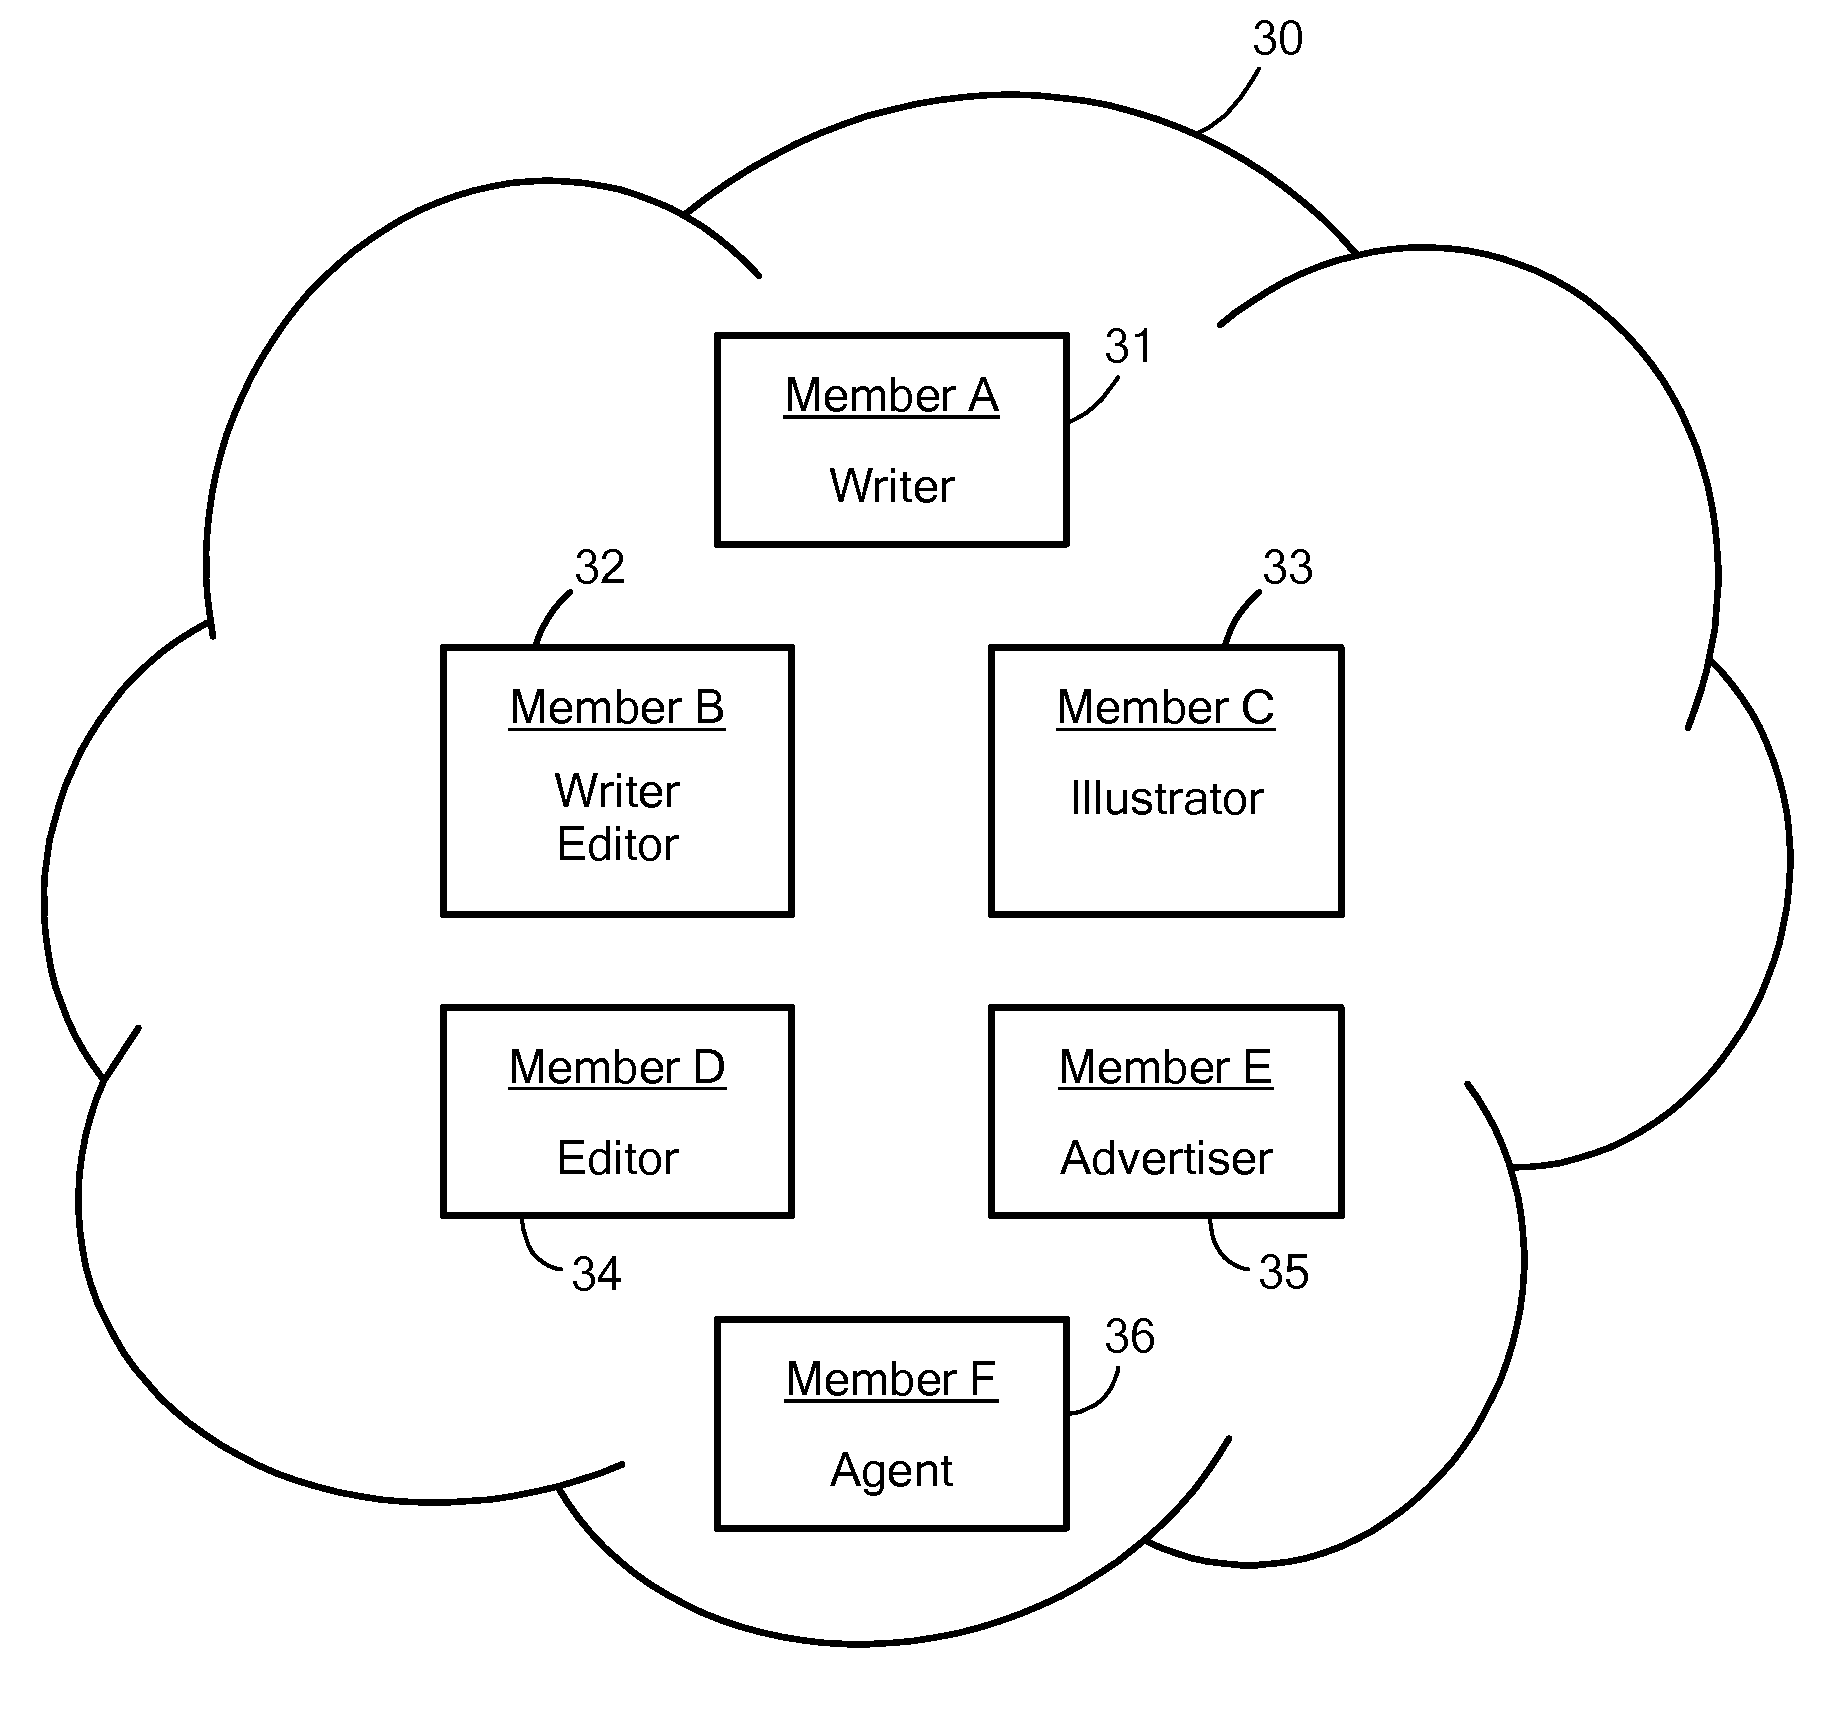 Apparatus and method of objectively rating members of an online group